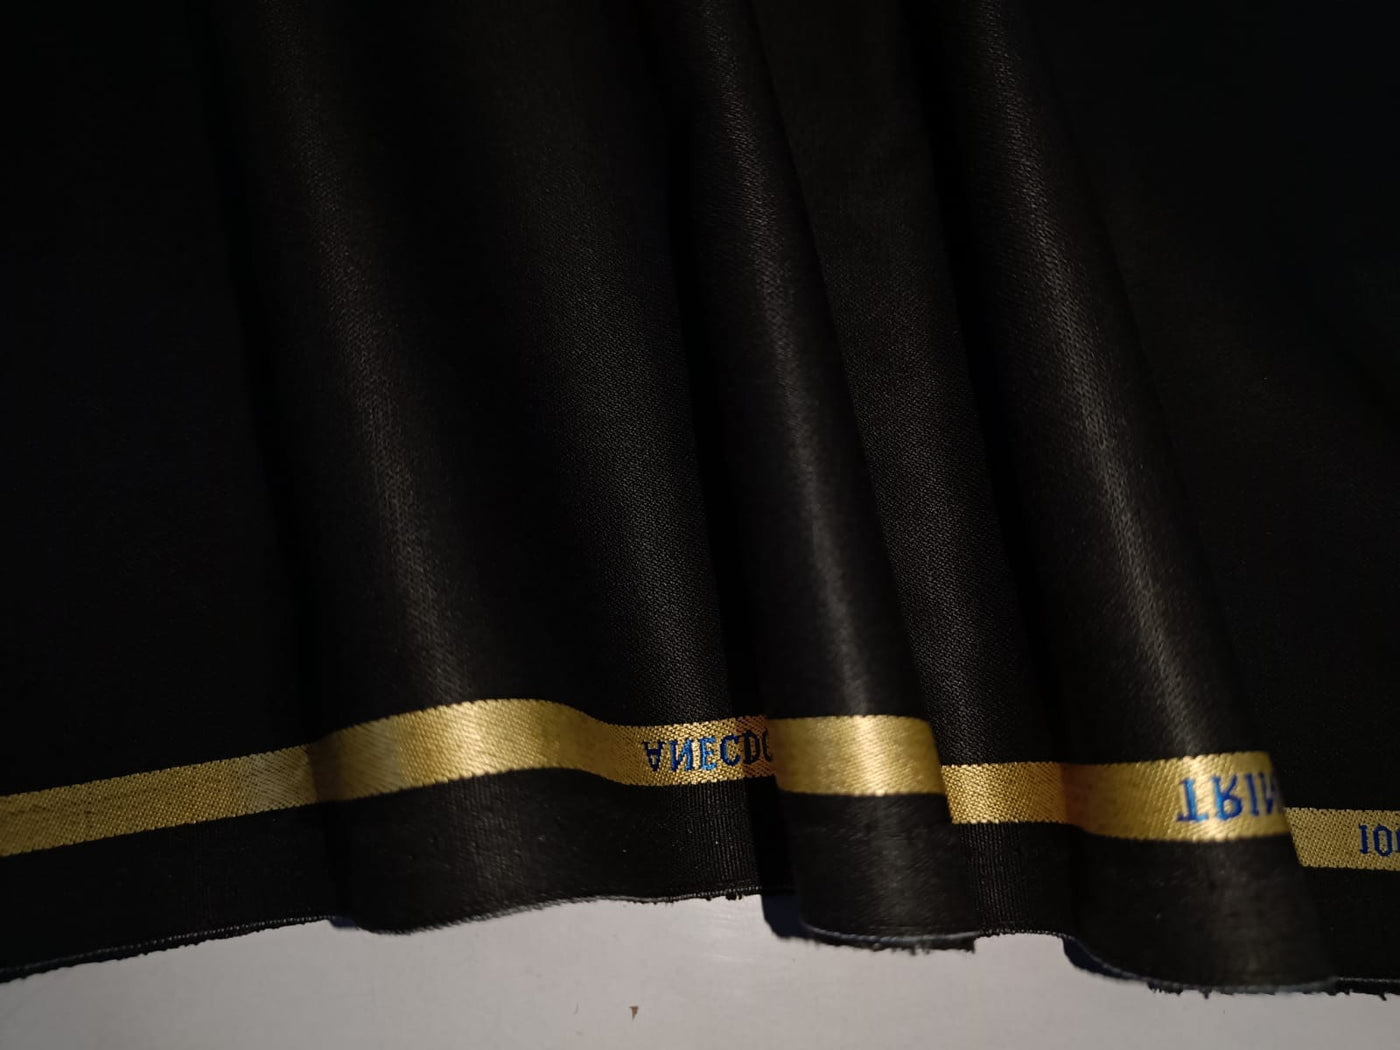 Heavy weight premium Suiting Fabric 58" wide JET BLACK TWILL WEAVE [13059]